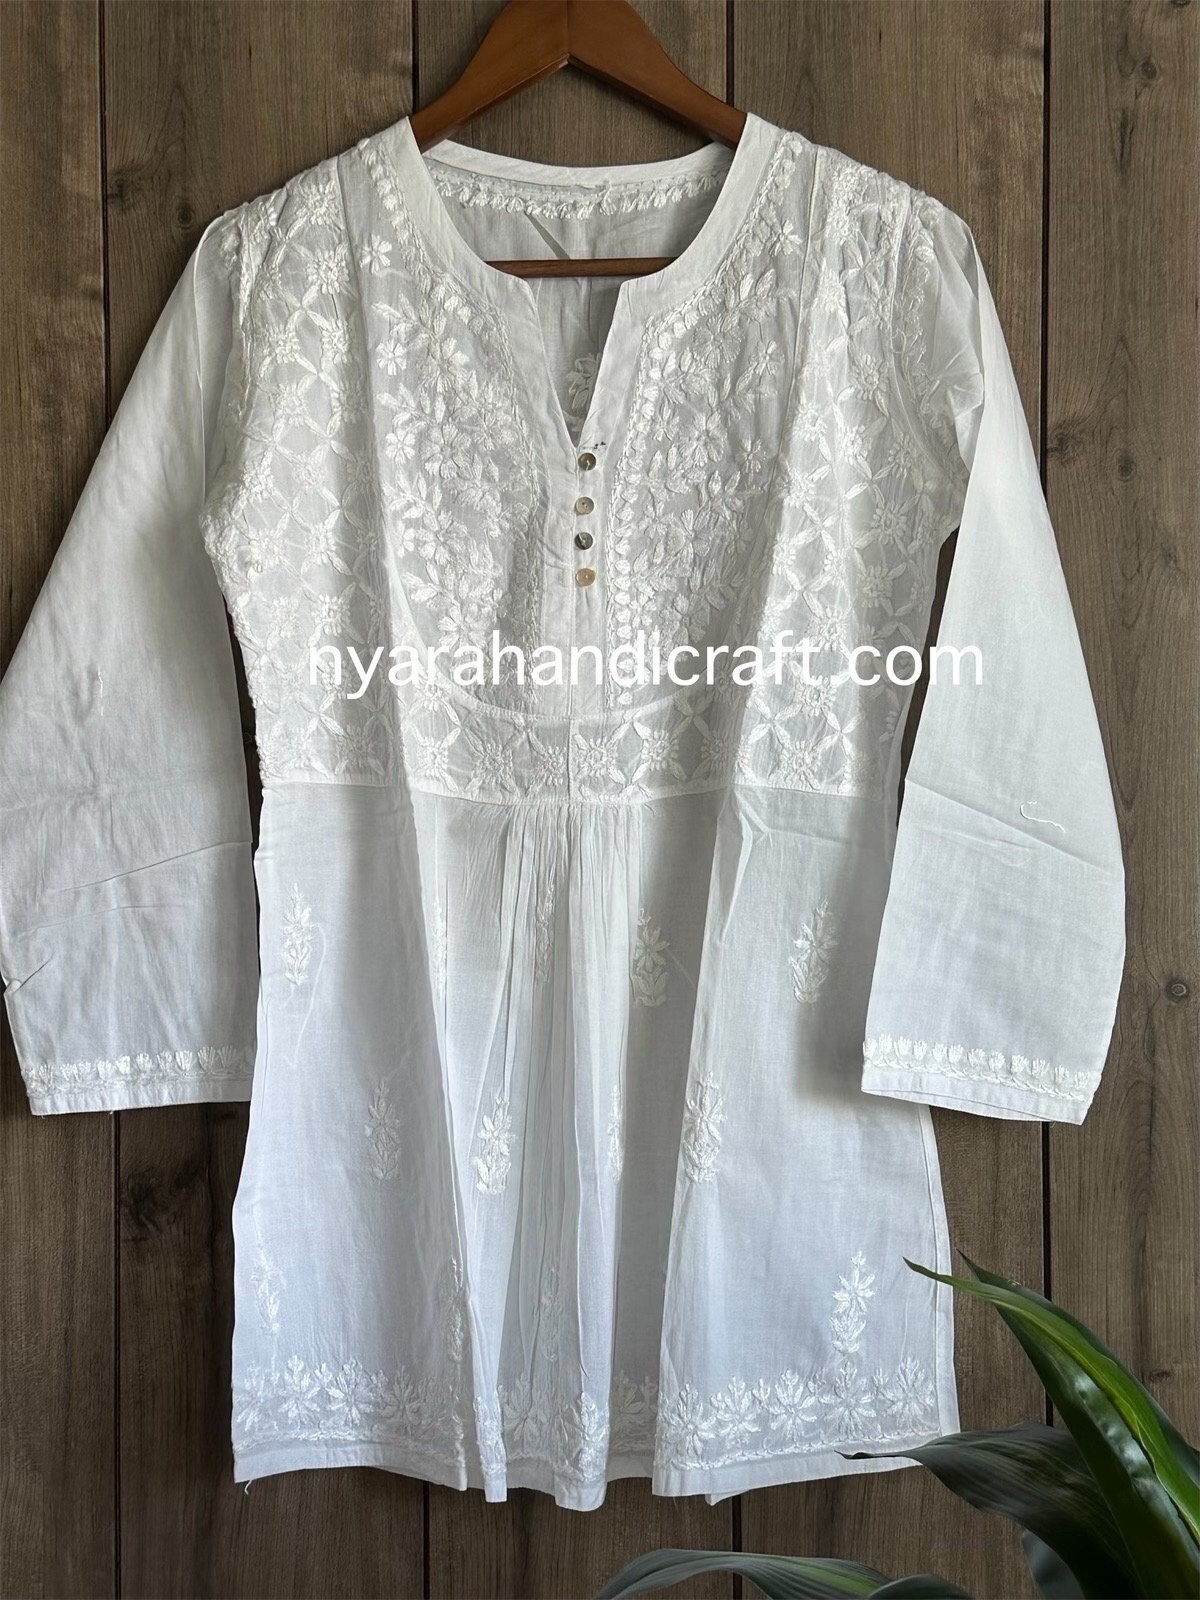 White Cotton Kurti with Full Sleeves at best price in Lucknow